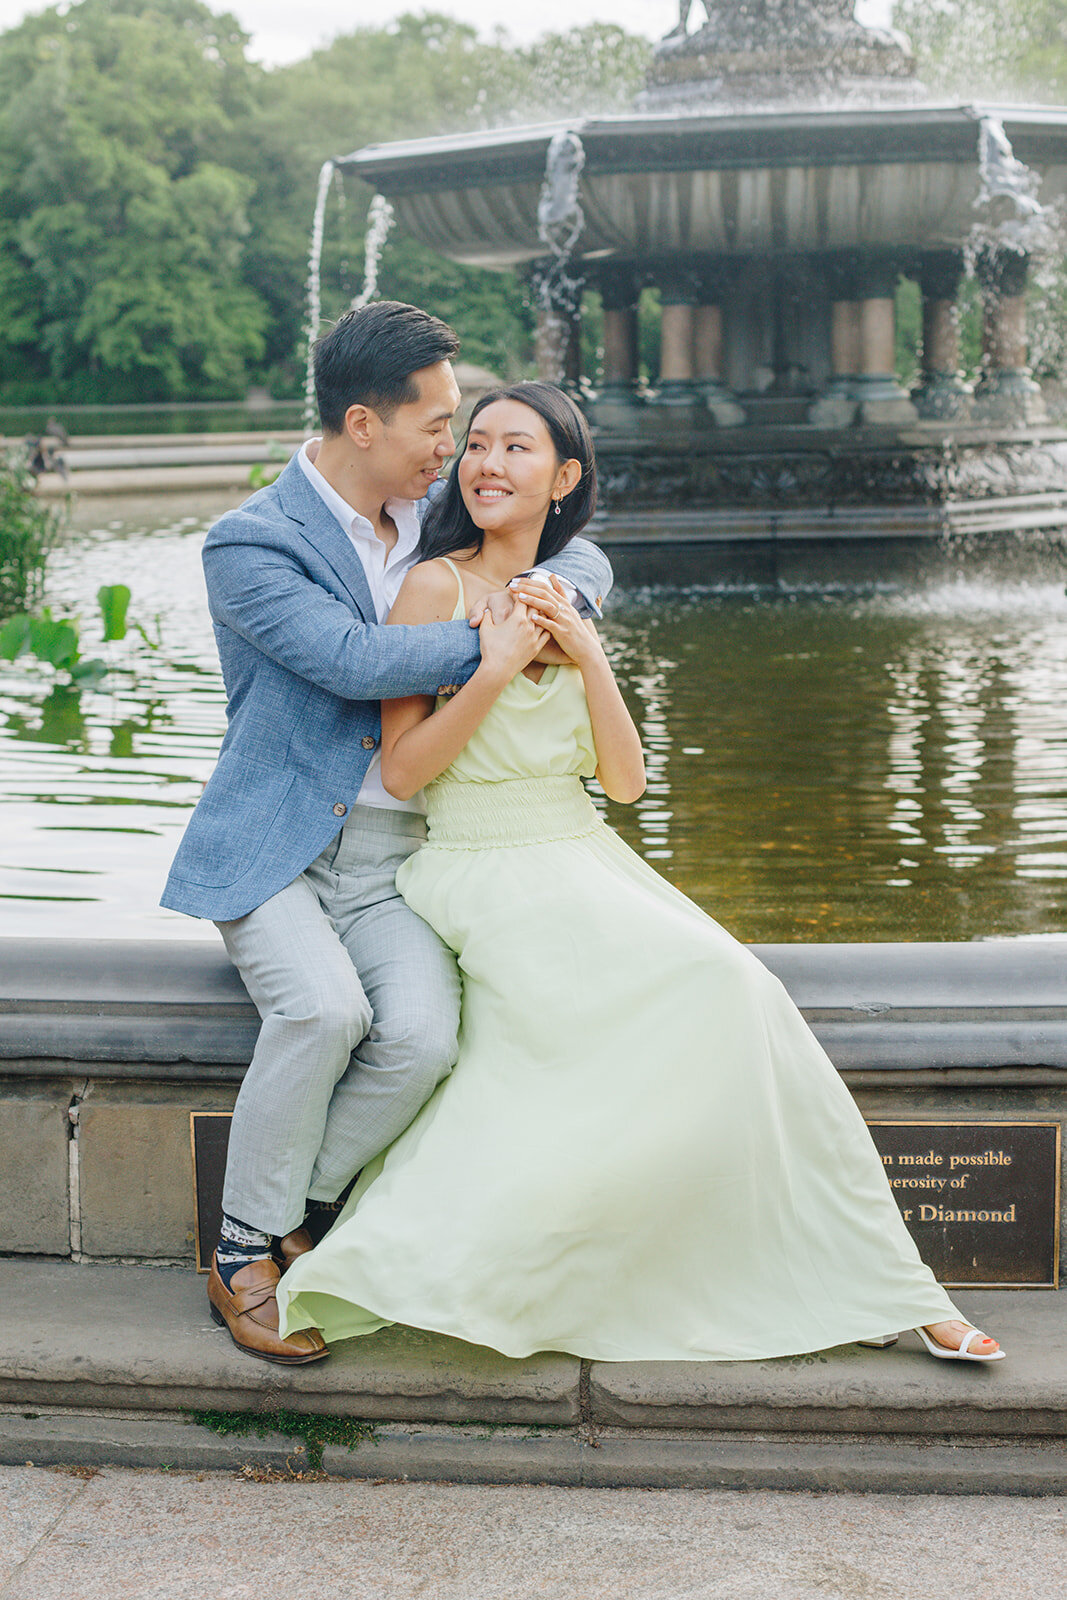 Wild_Sound_Photography_Central_Park_Engagement_Danny_LisaEY3A9792_websize